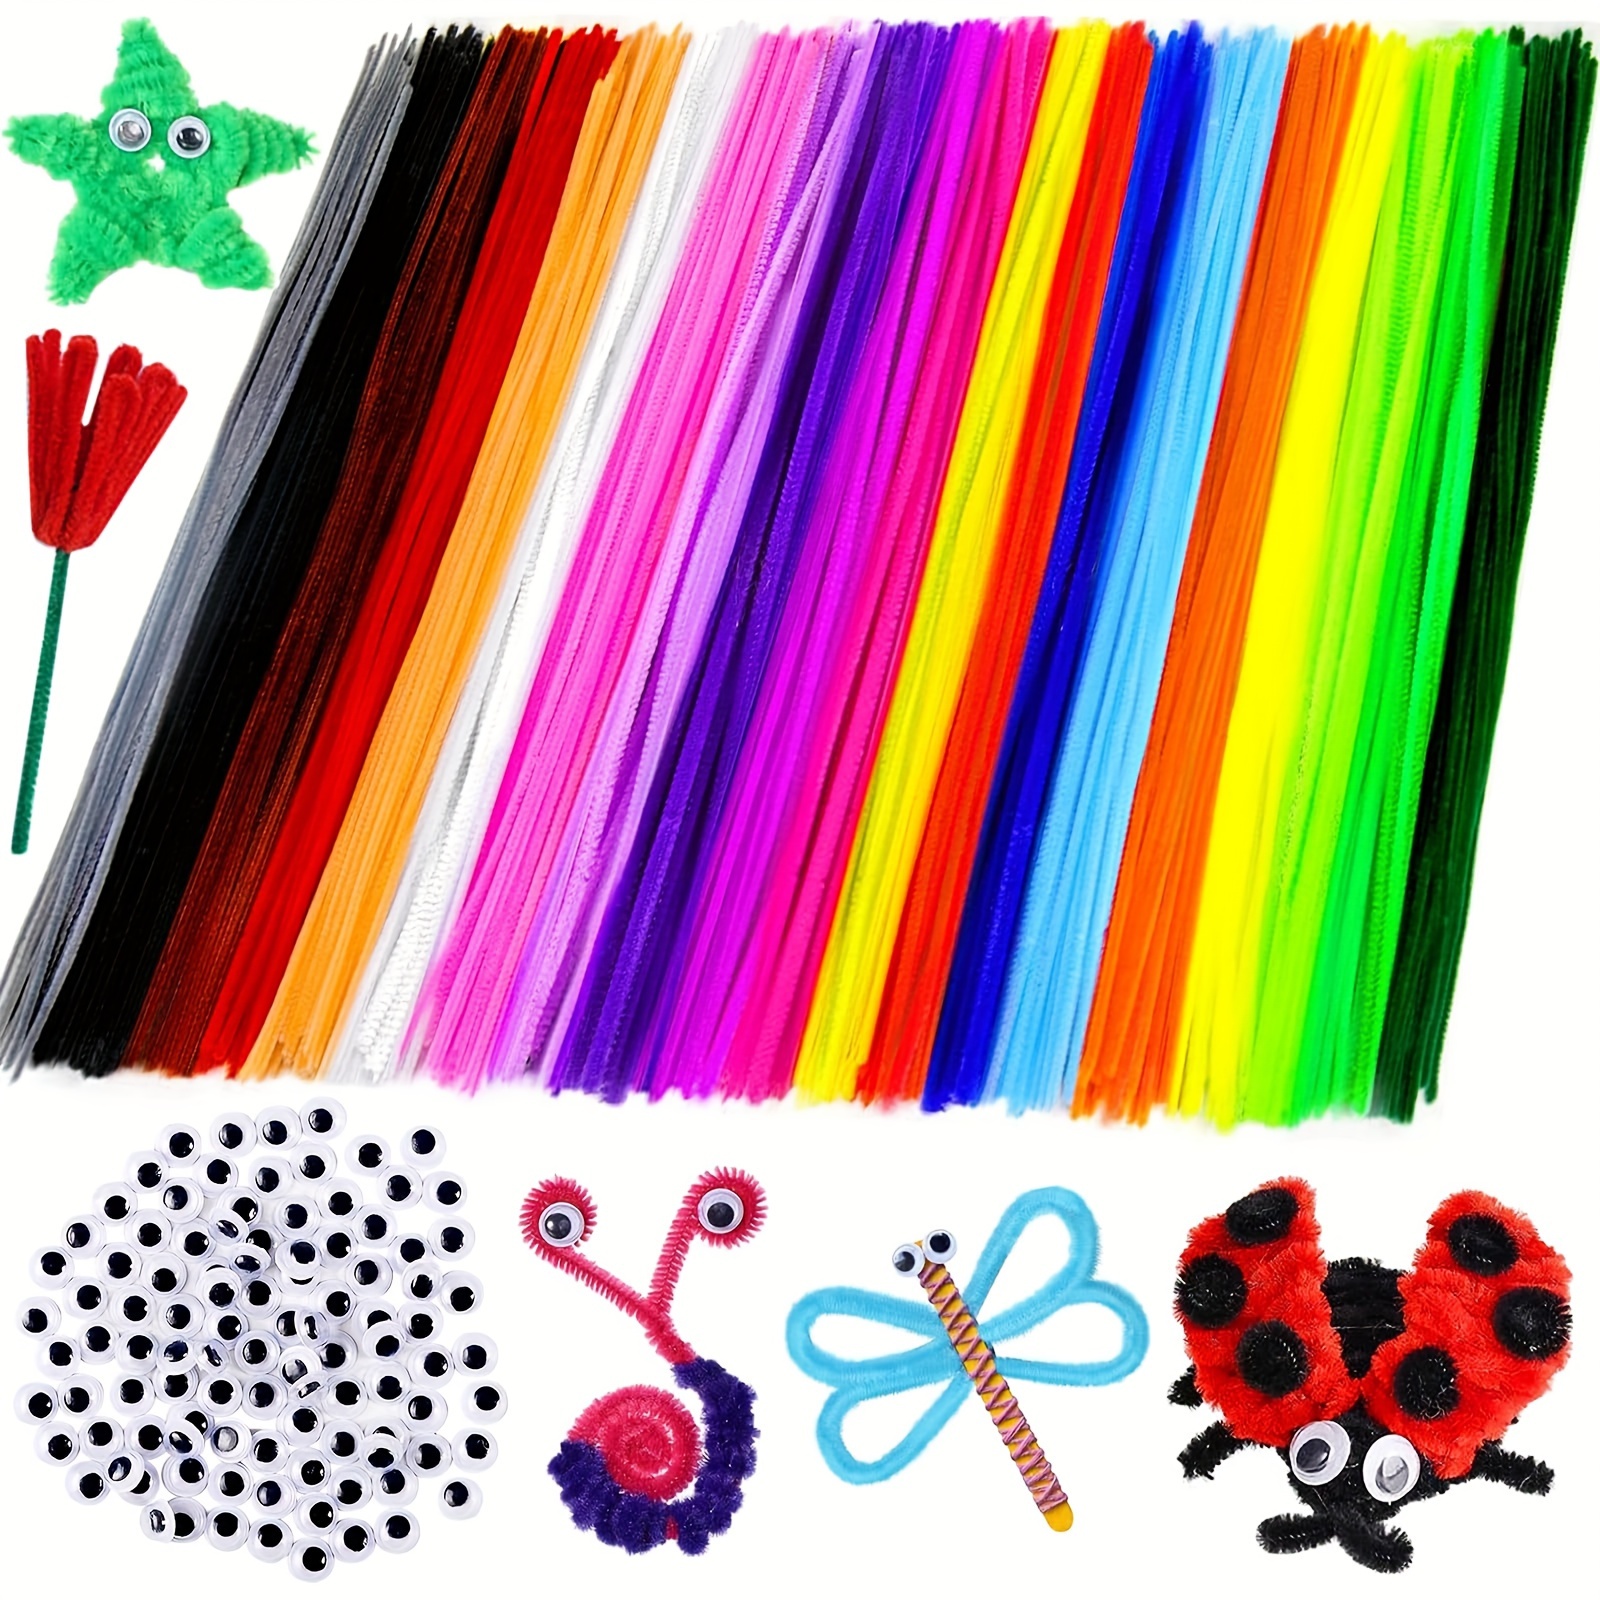 

Diy Craft Supplies - 150pcs Mixed Color Twist Sticks And Self-adhesive Wiggle Eyes Set For Arts, Crafts & Decorations, Iron Material, Chenille Rods Included